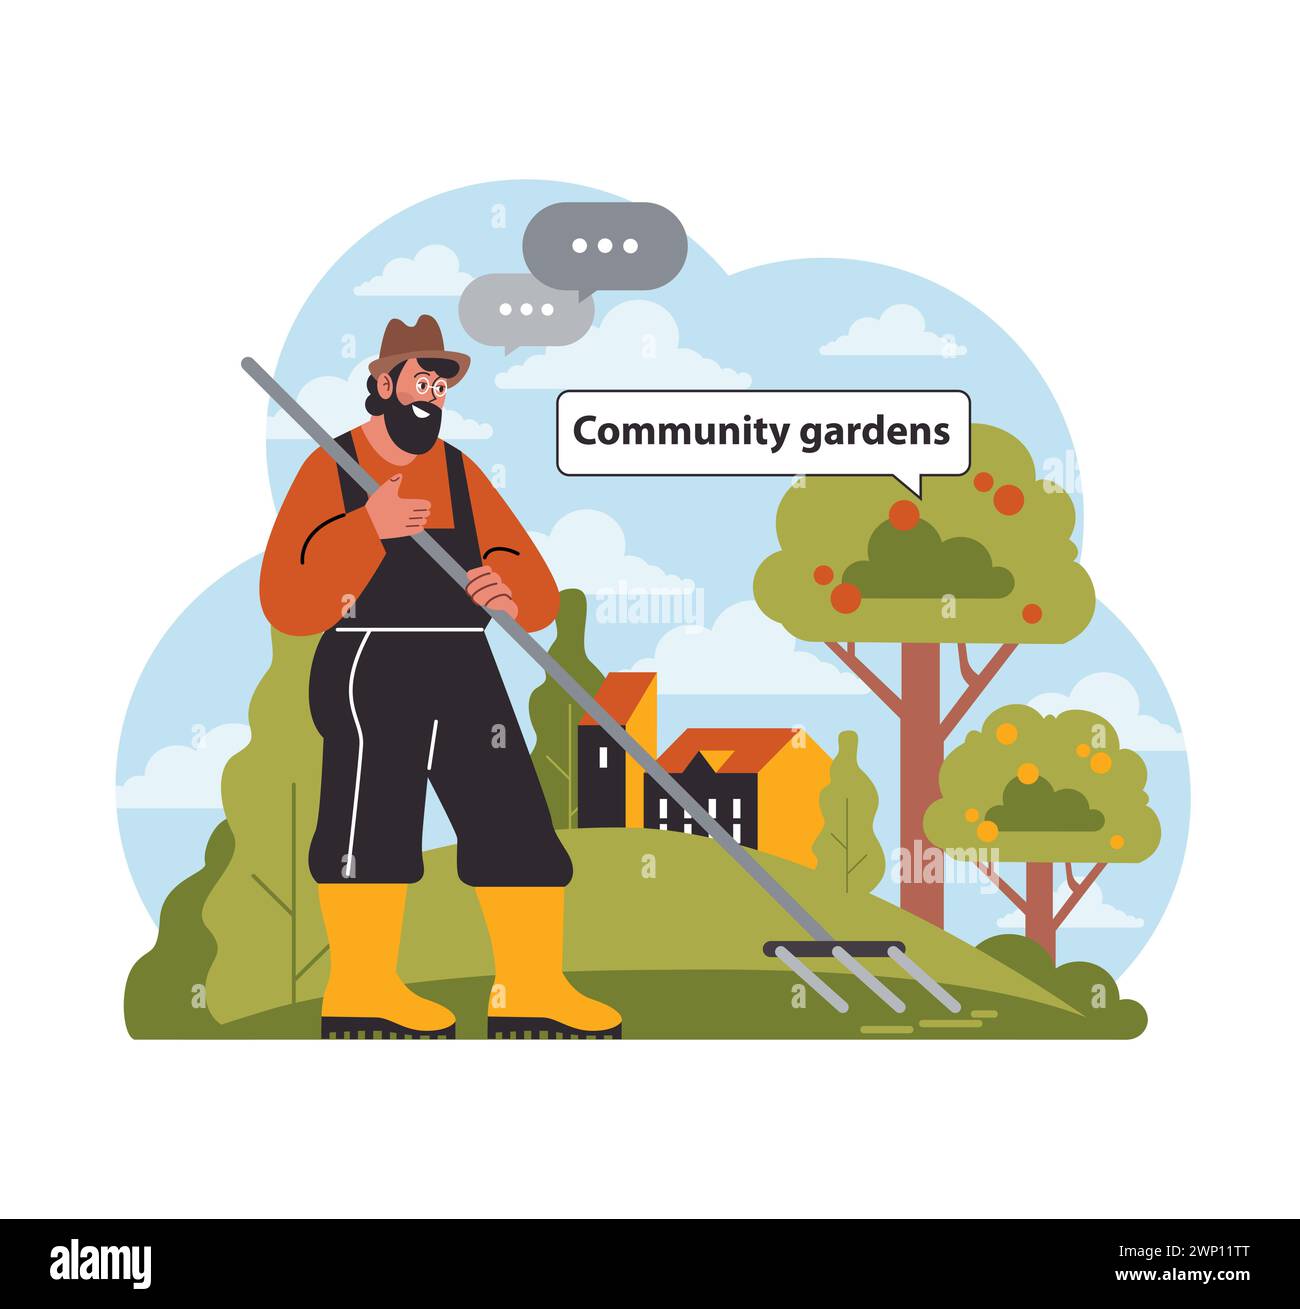 Engaged gardener promotes community gardens. Standing amidst green trees near city buildings, he encourages urban green spaces. Collective farming initiative. Flat vector illustration Stock Vector